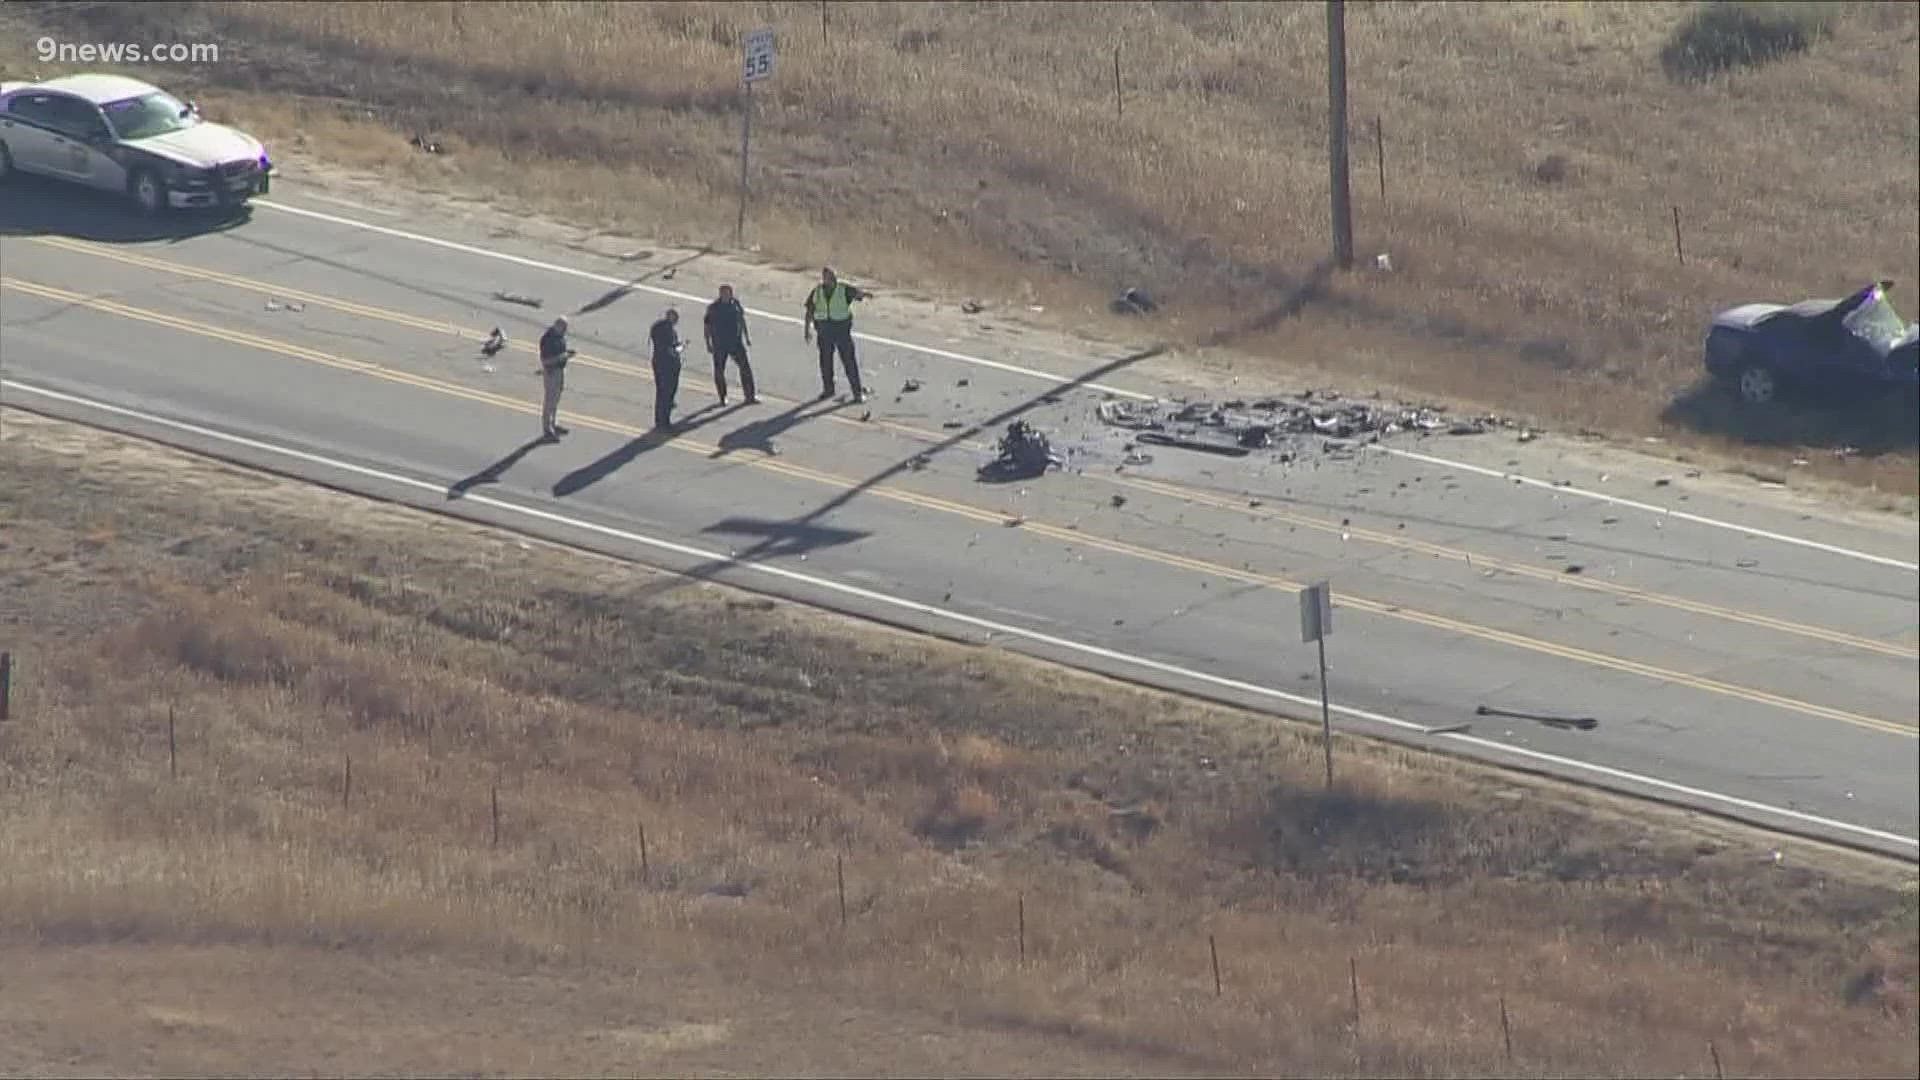 It wasn't known yet what led to the crash, according to the Colorado State Patrol.